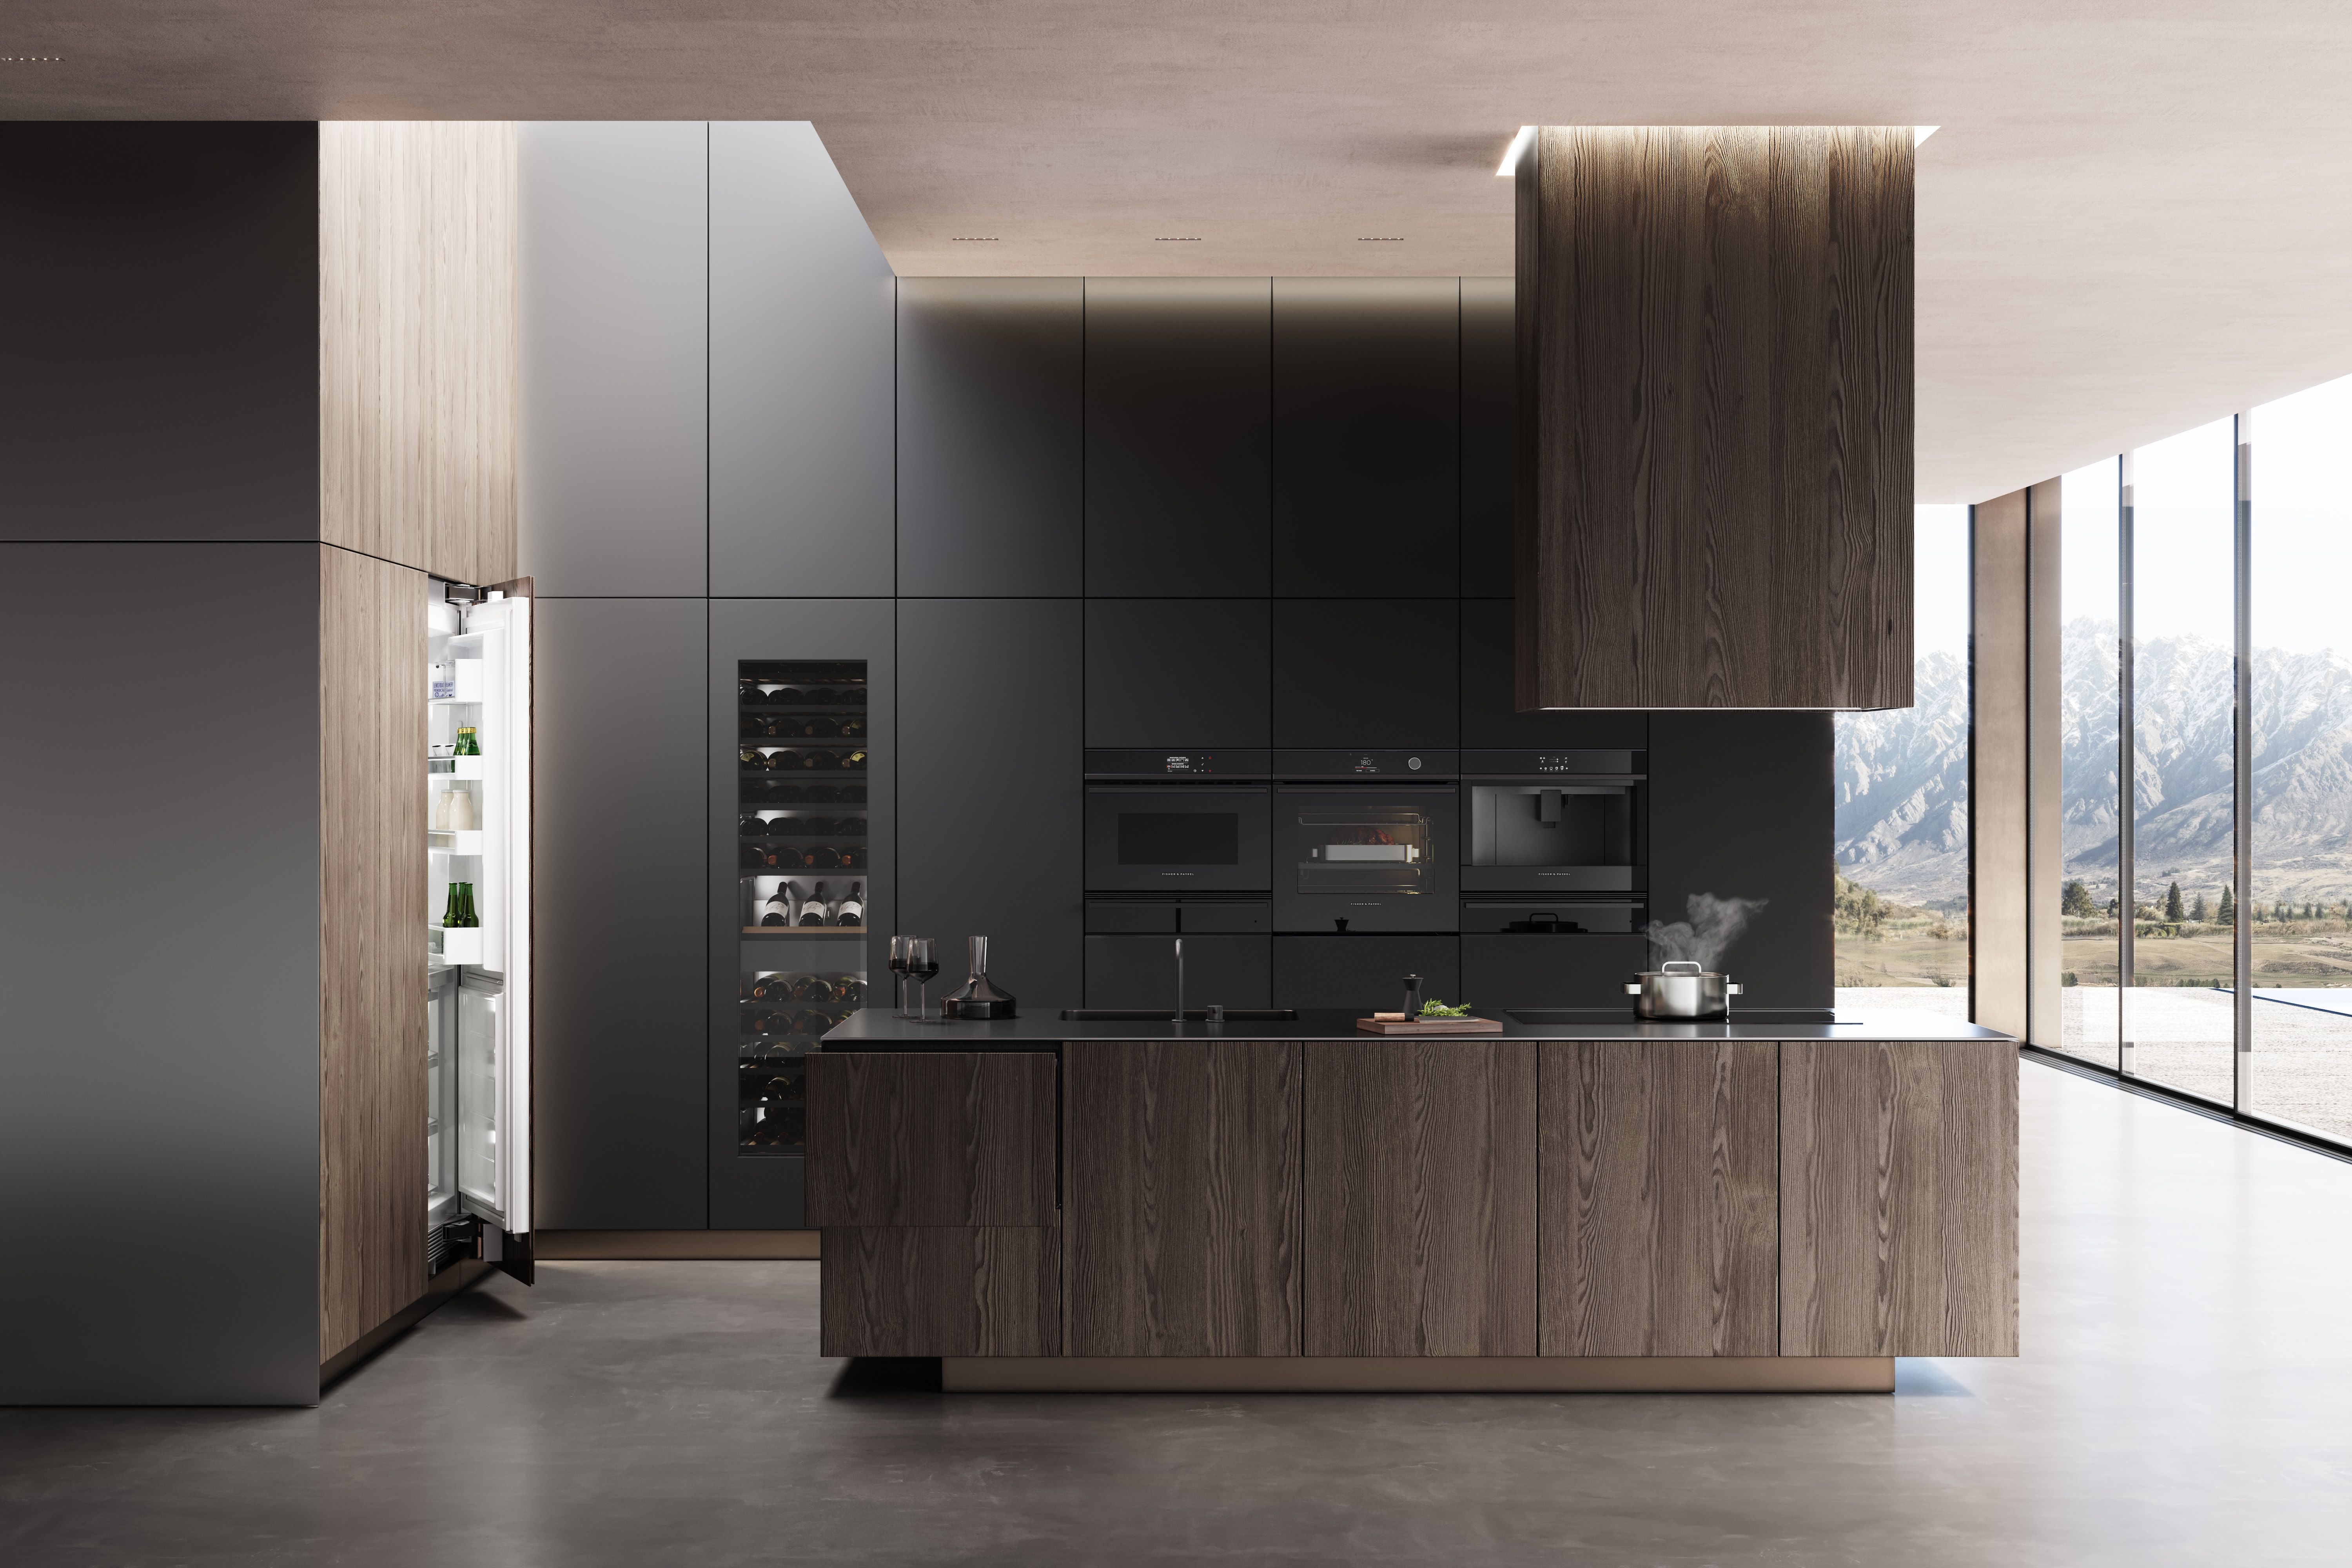 Save Up To 10% on Fisher & Paykel* at Hart & Co